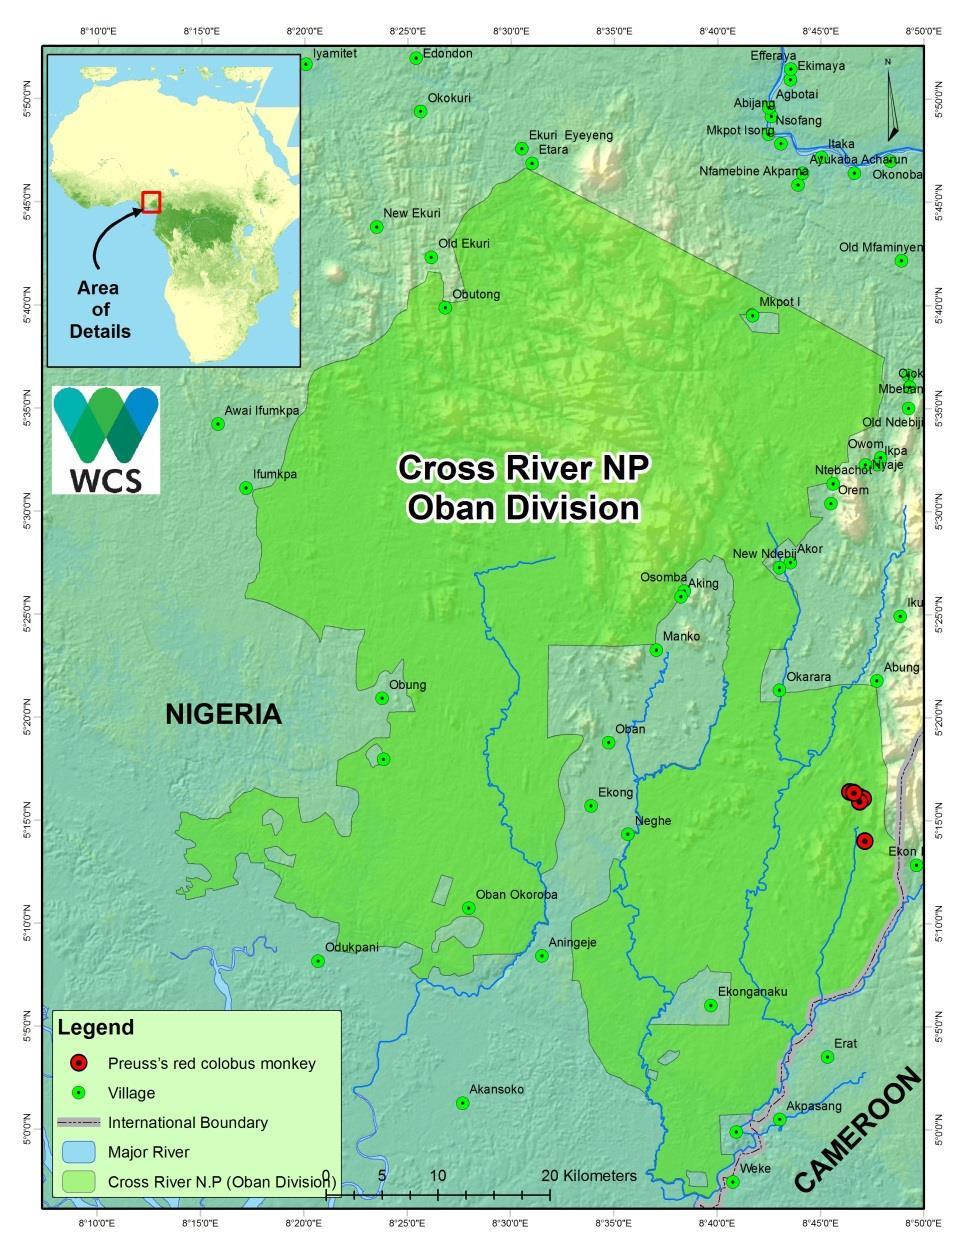 Figure 2: Map of distribution of P. preussi in Nigeria CONCLUSION Based on our findings, there is still presence of P. Preussi in the Oban Division of Cross River National Park.